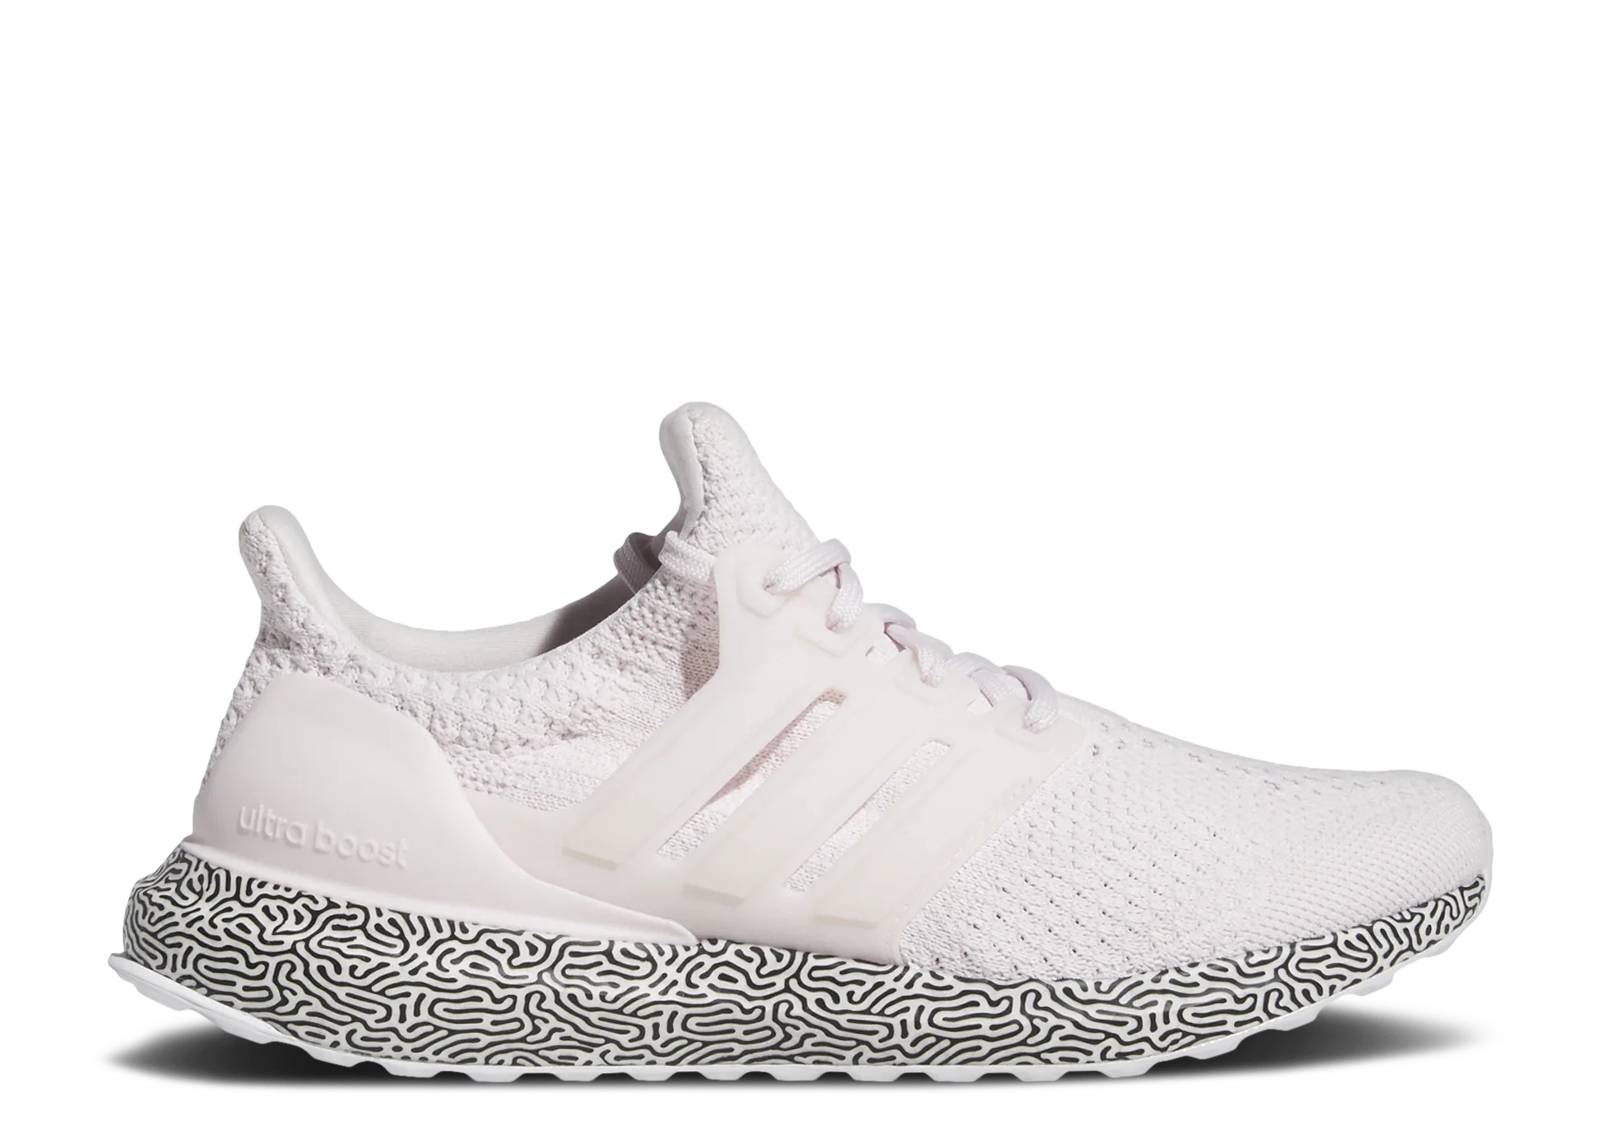 Wmns UltraBoost DNA 'Almost Pink'